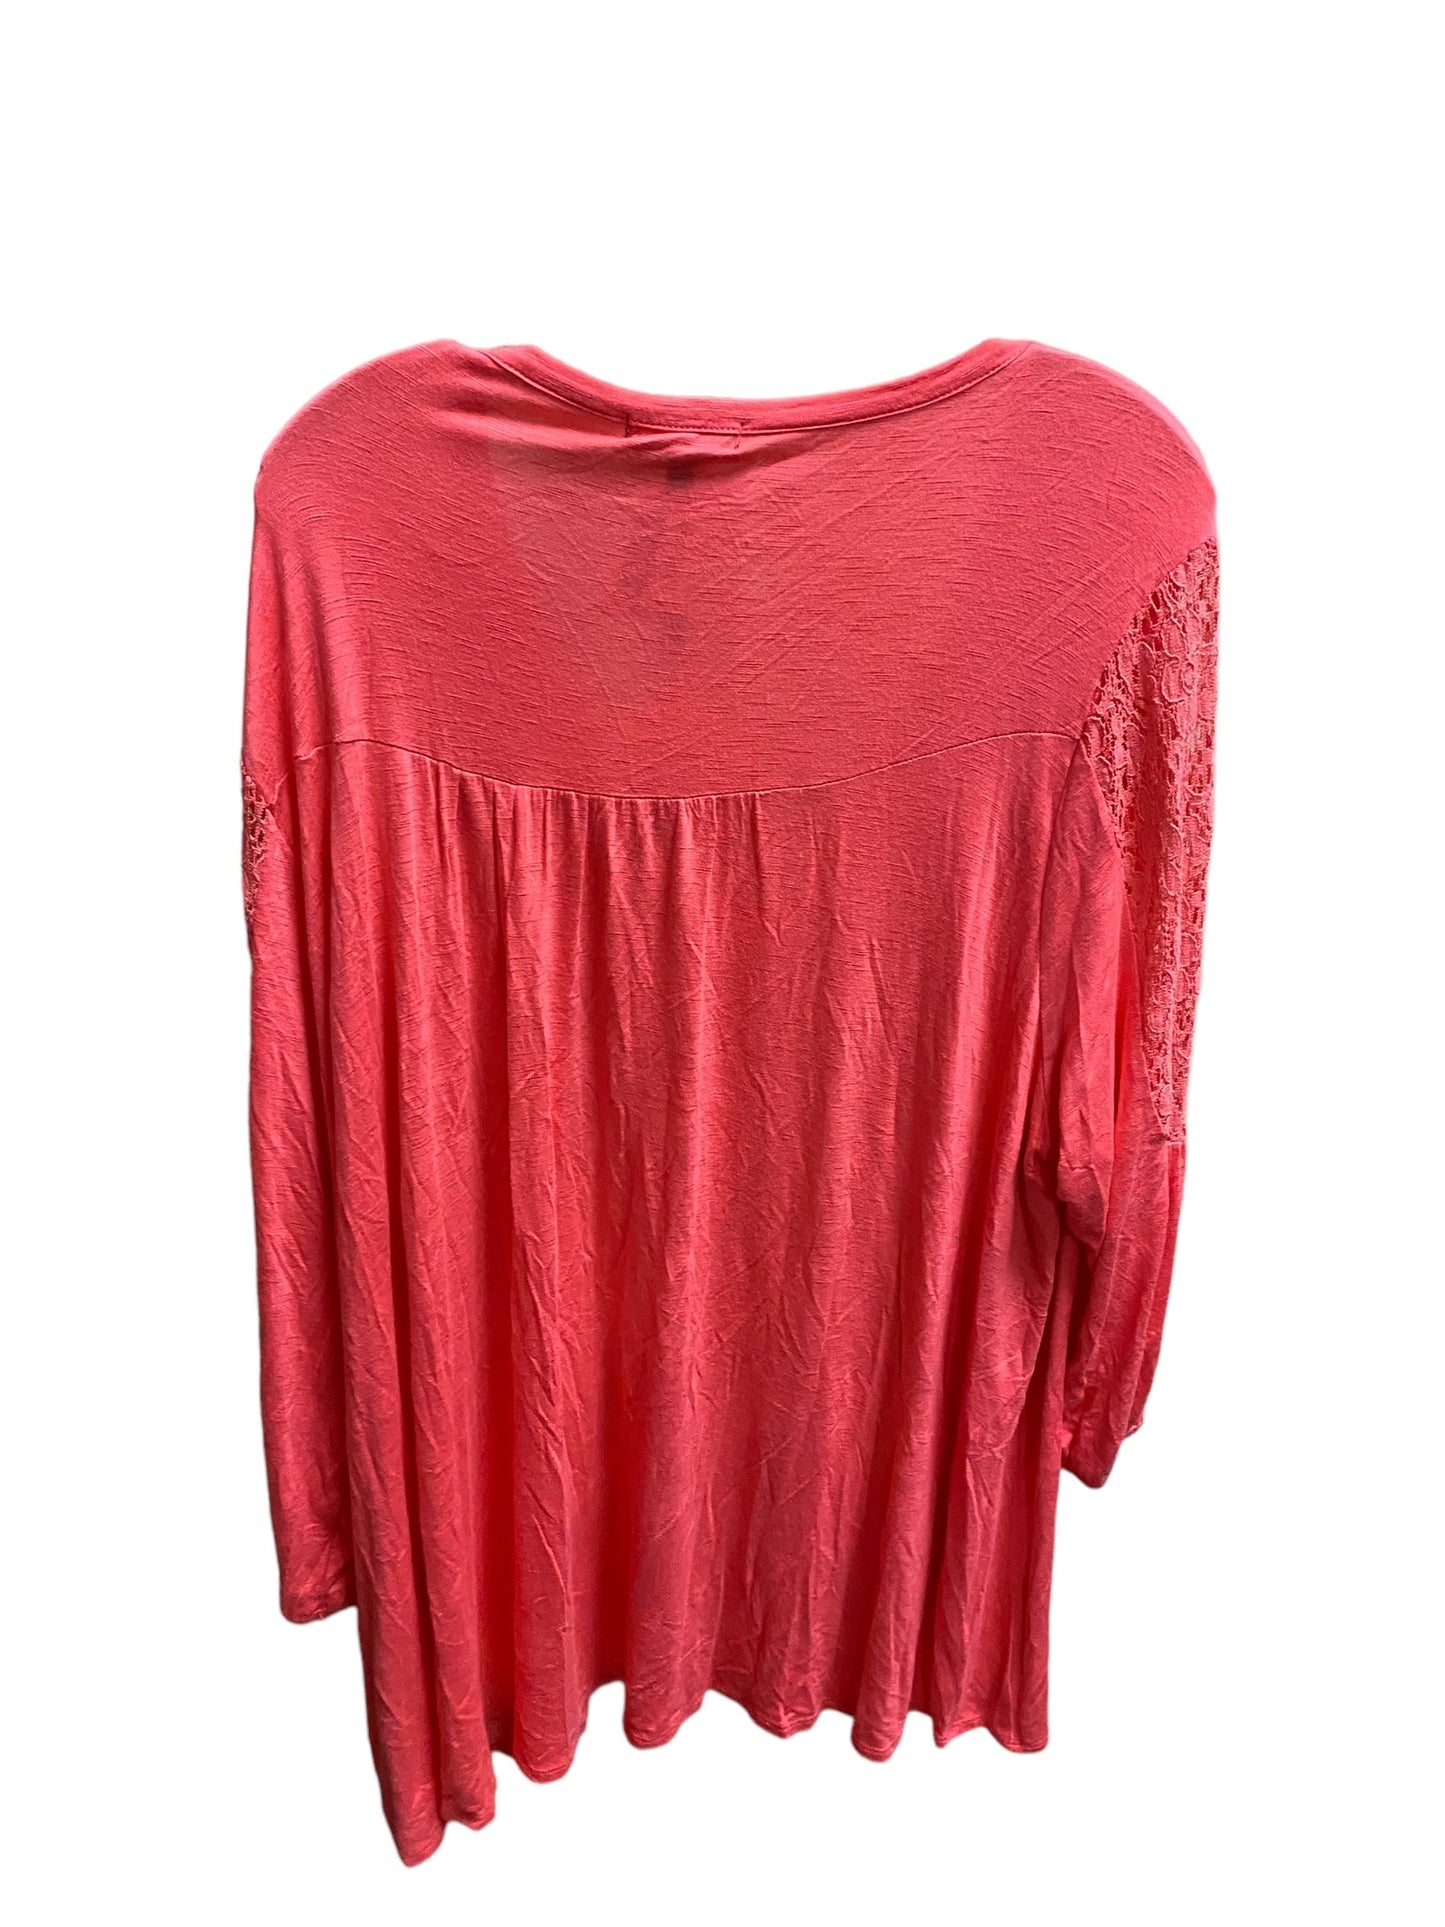 Coral Top Long Sleeve Rxb, Size 3x